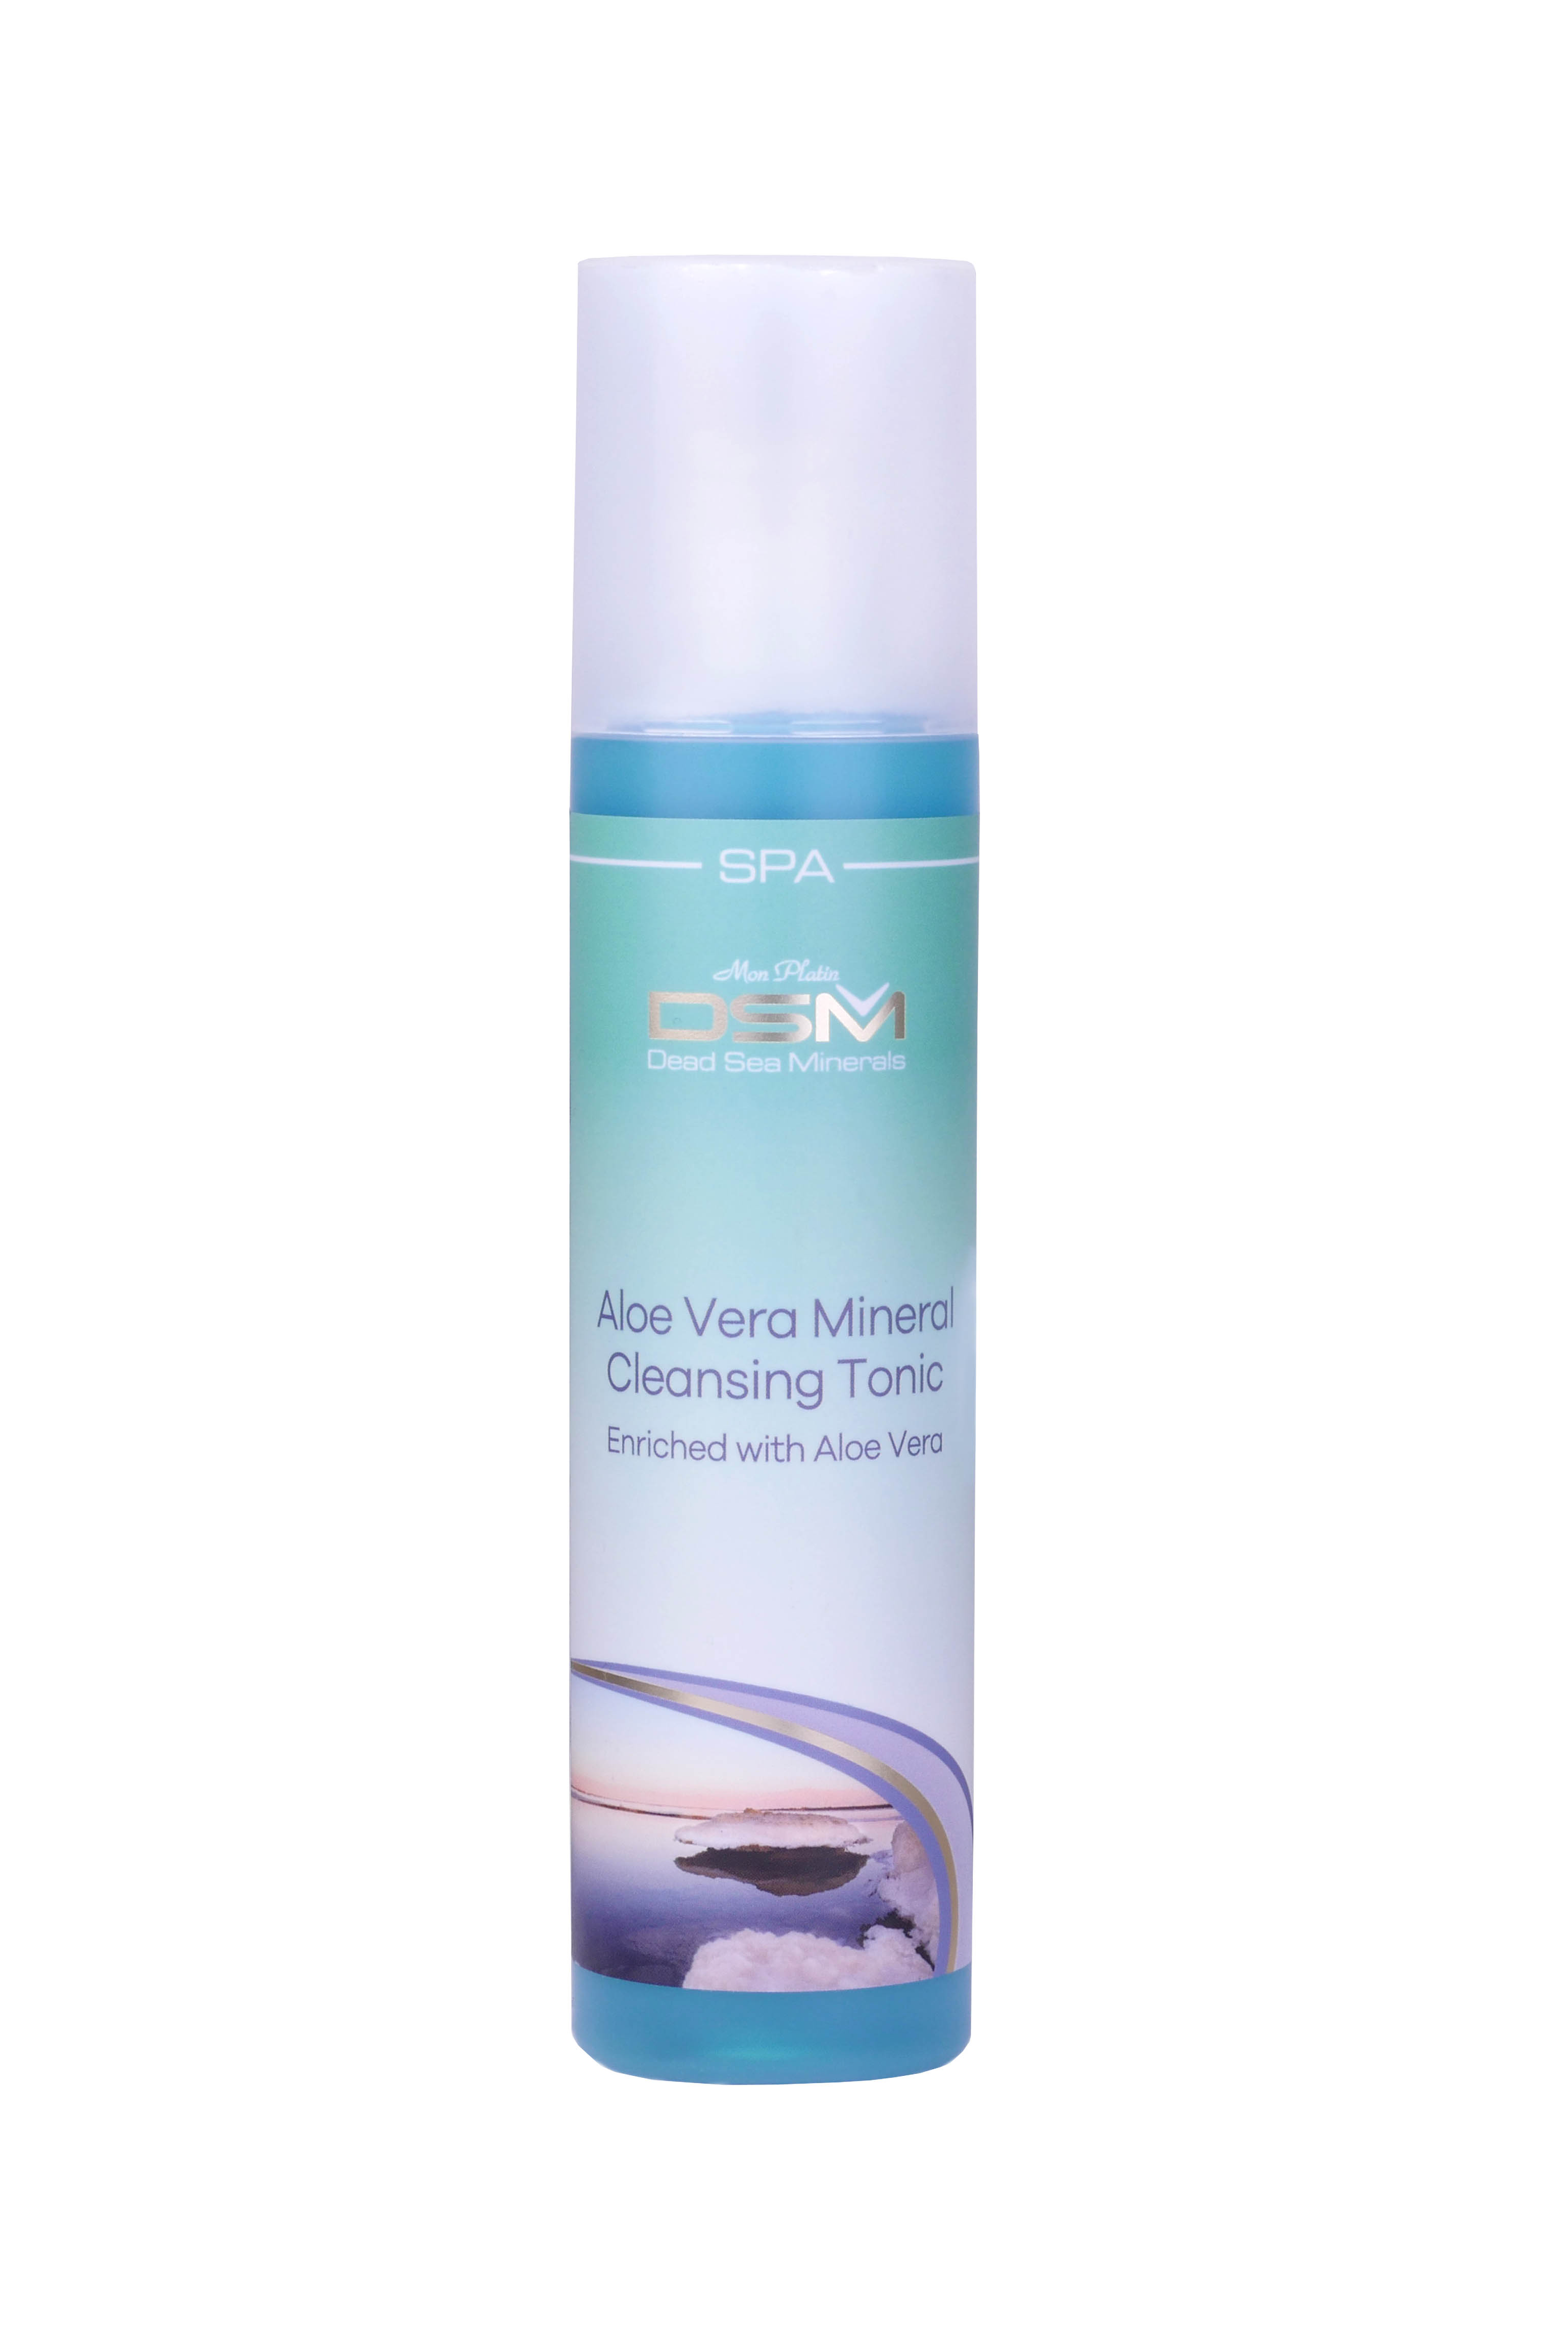 Face cleansing tonic for dry skin